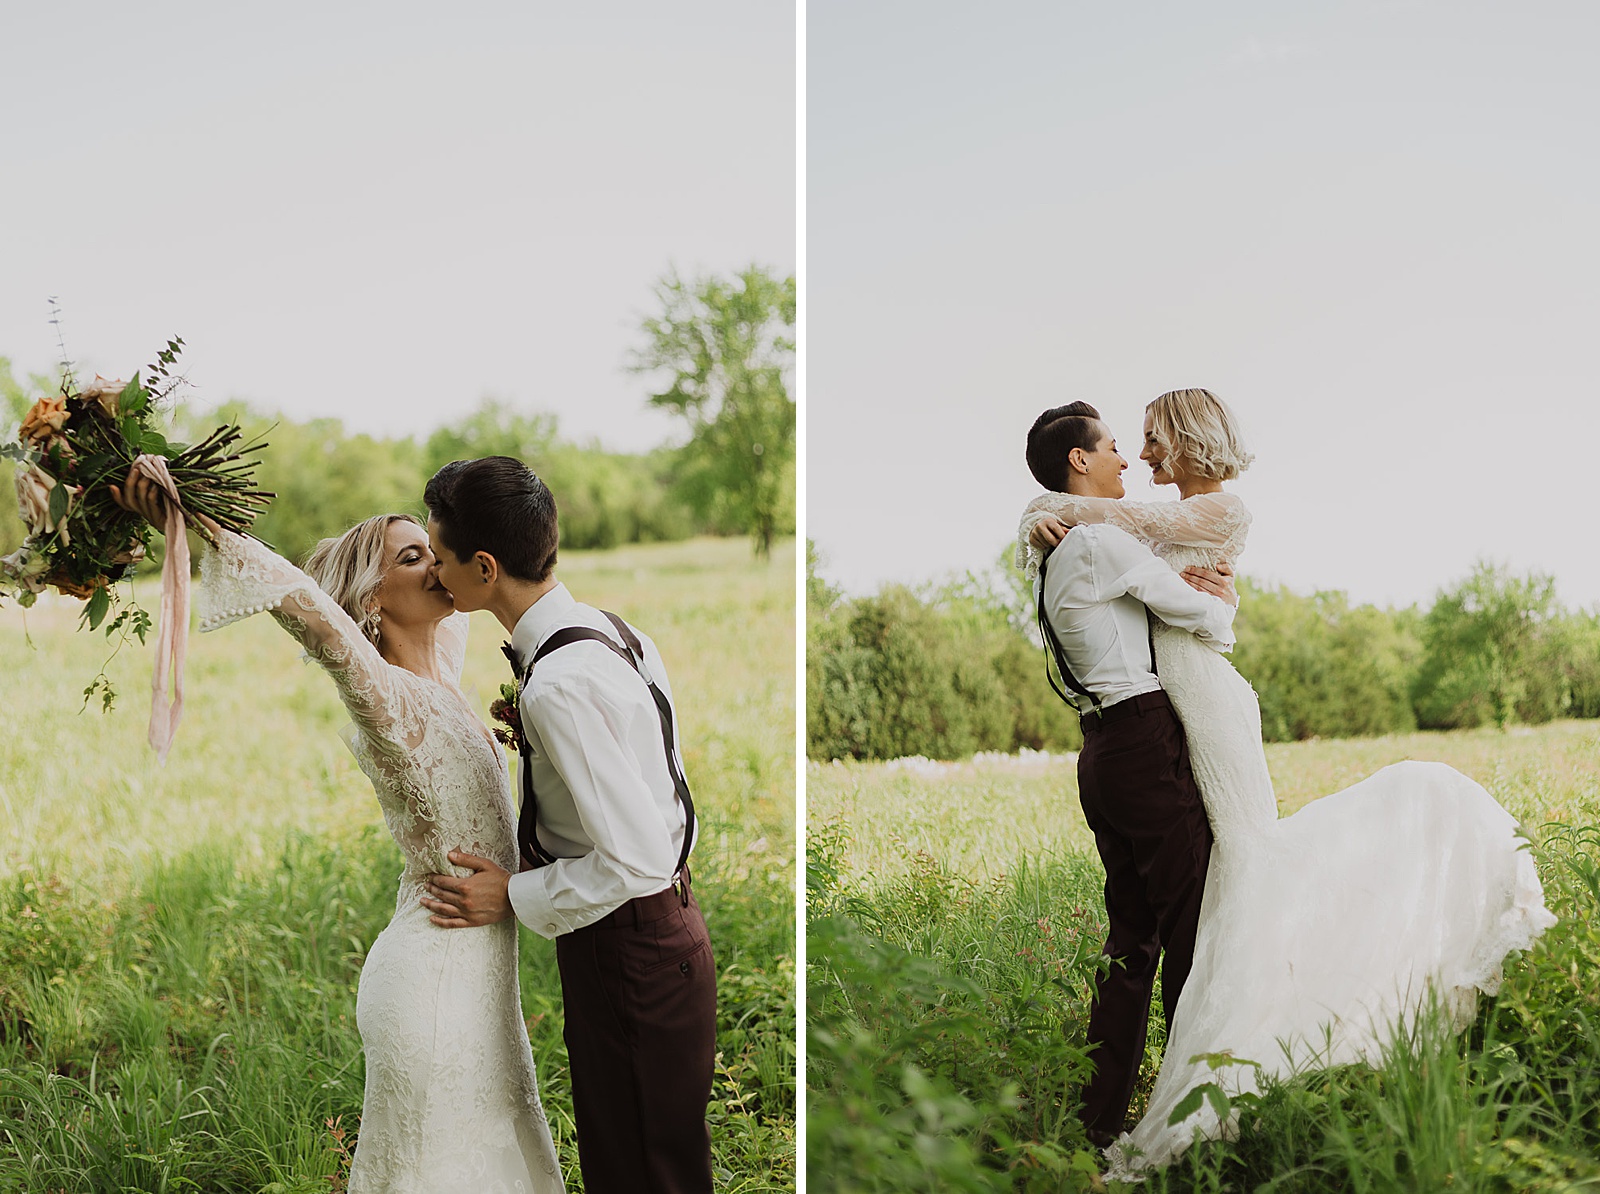 Newlywed Portraits Boho Styled Elopement captured by Caitlyn Cloud Photography